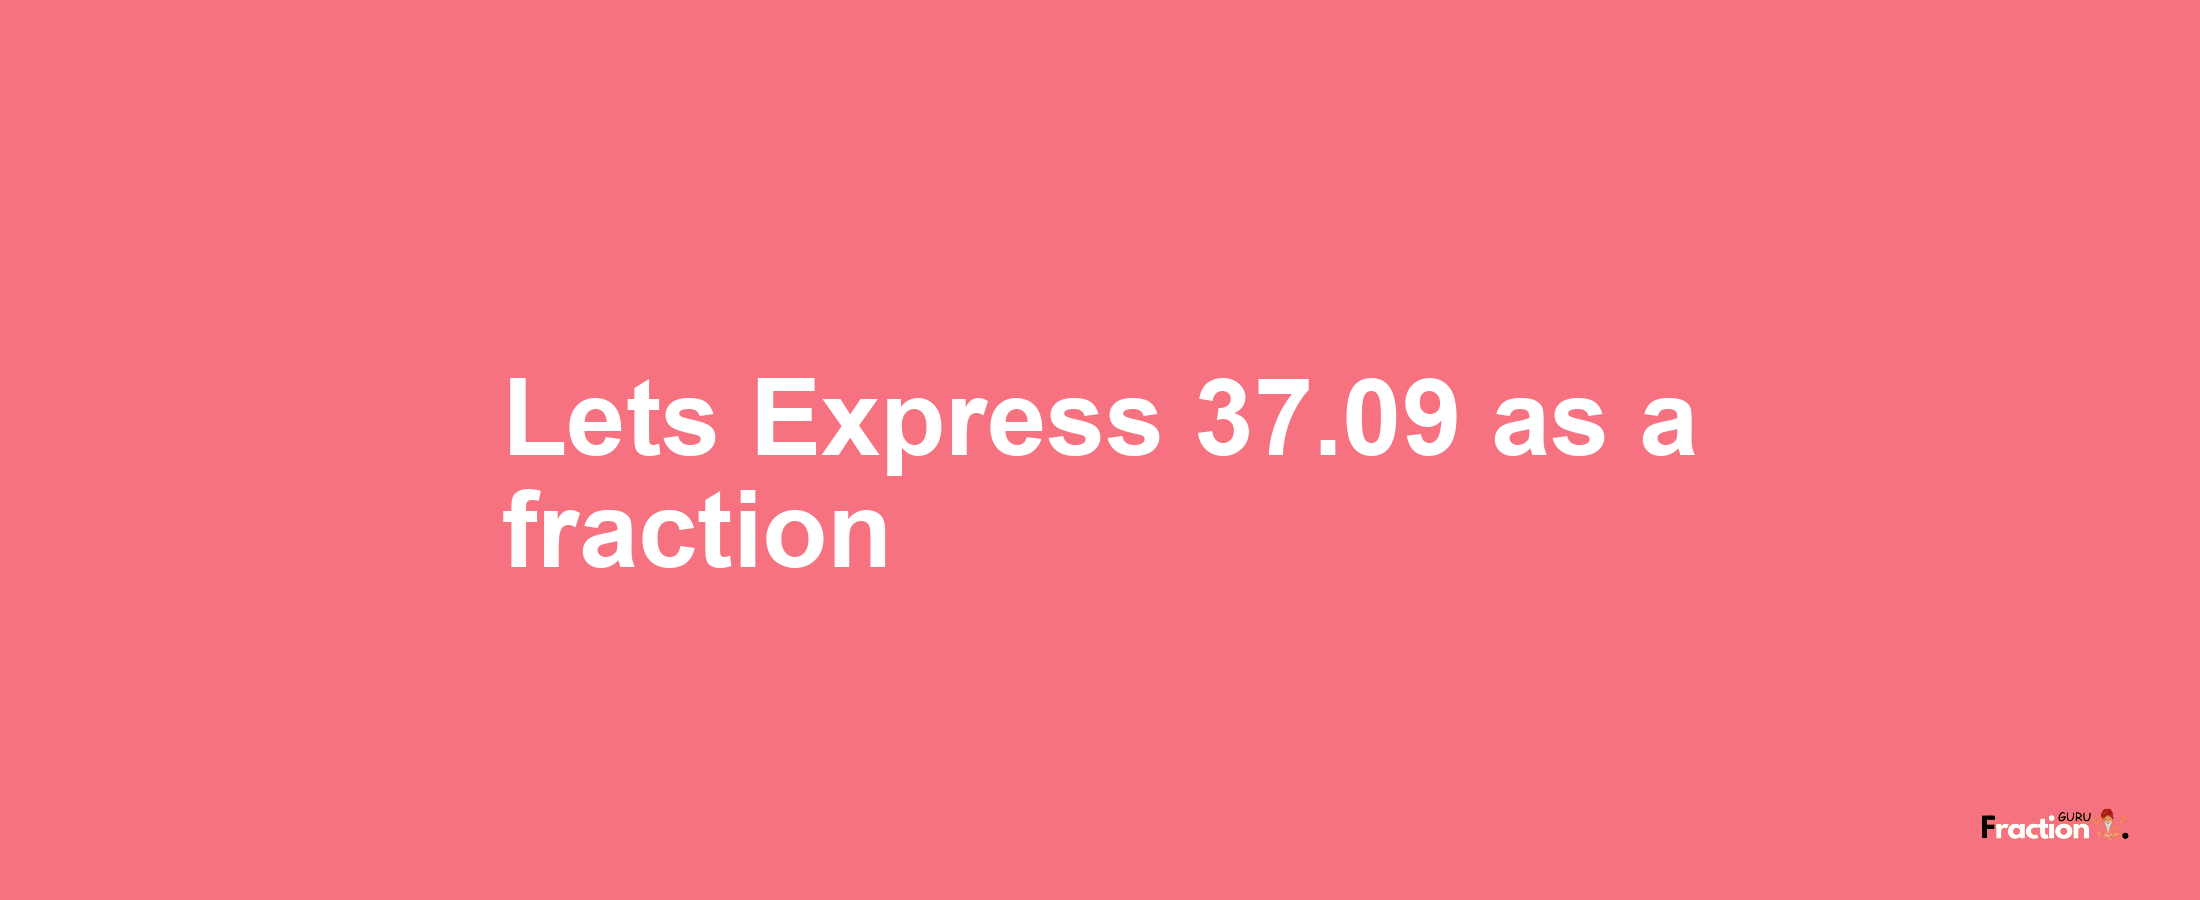 Lets Express 37.09 as afraction